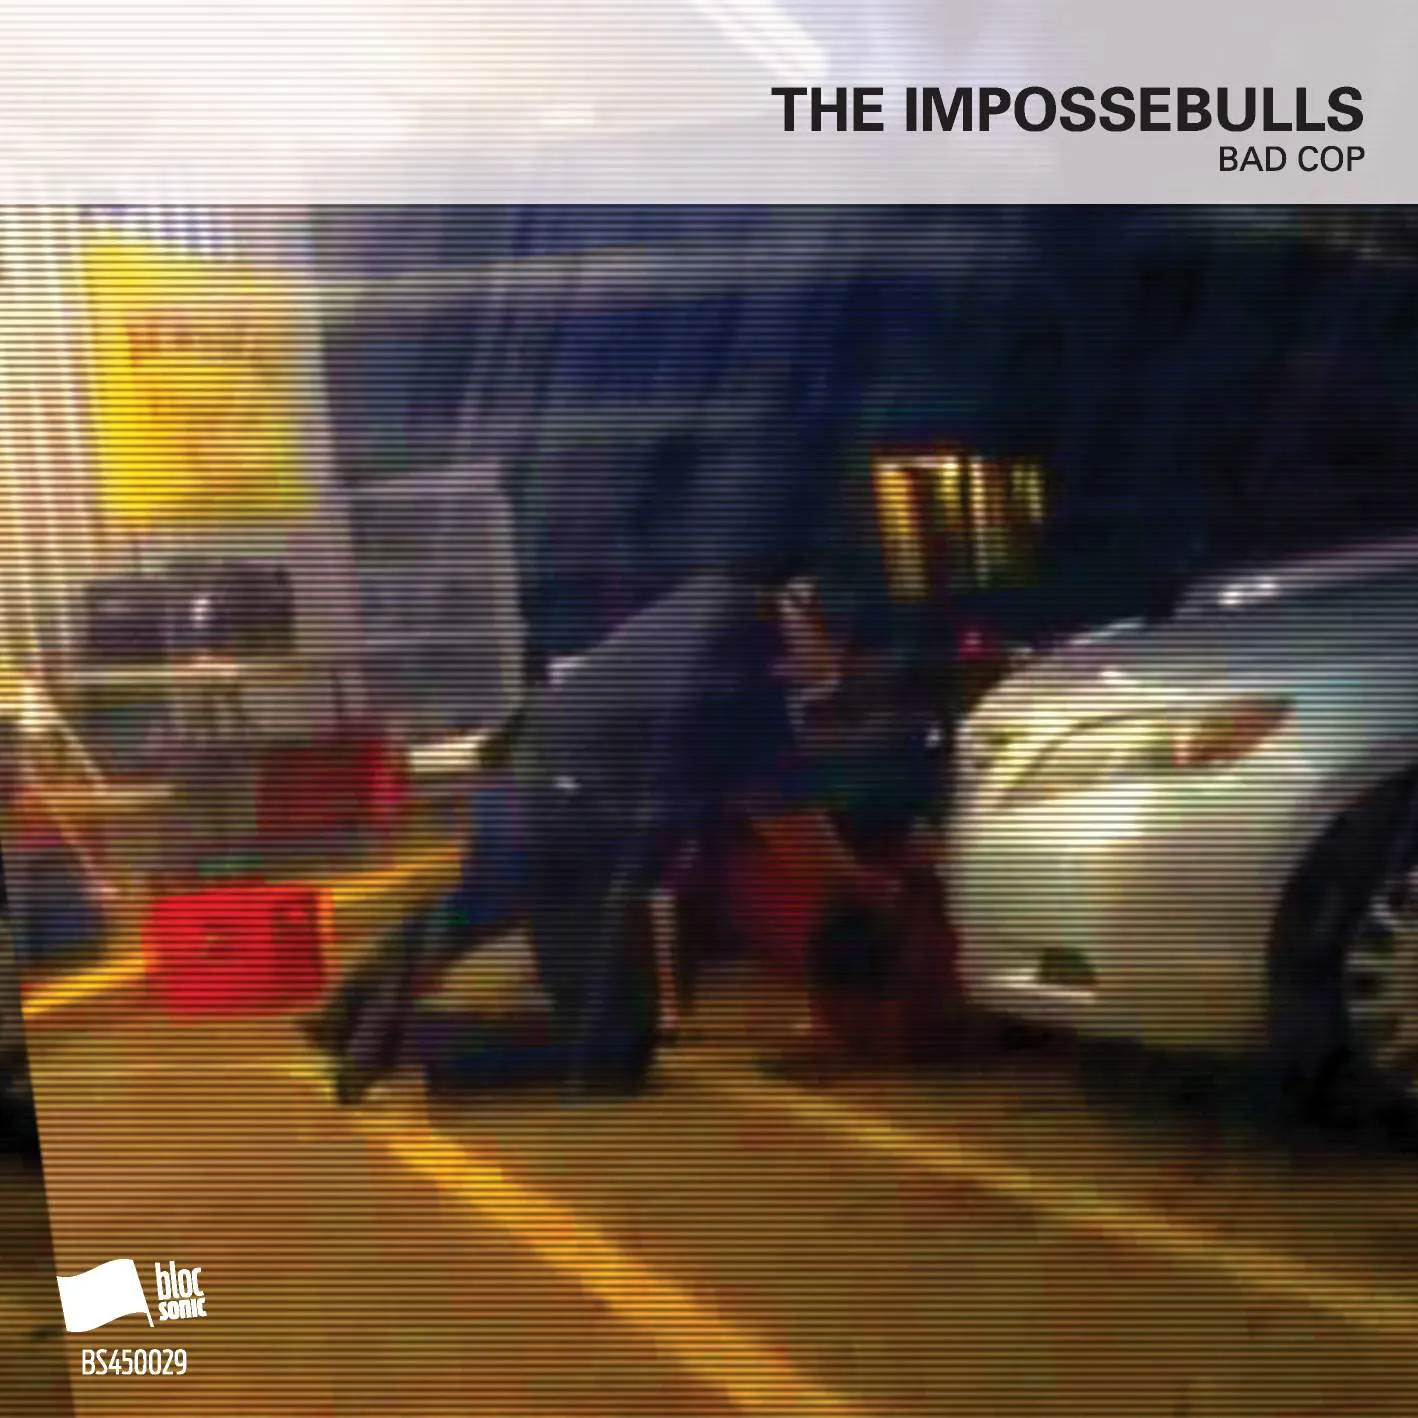 Album cover for “Bad Cop” by The Impossebulls